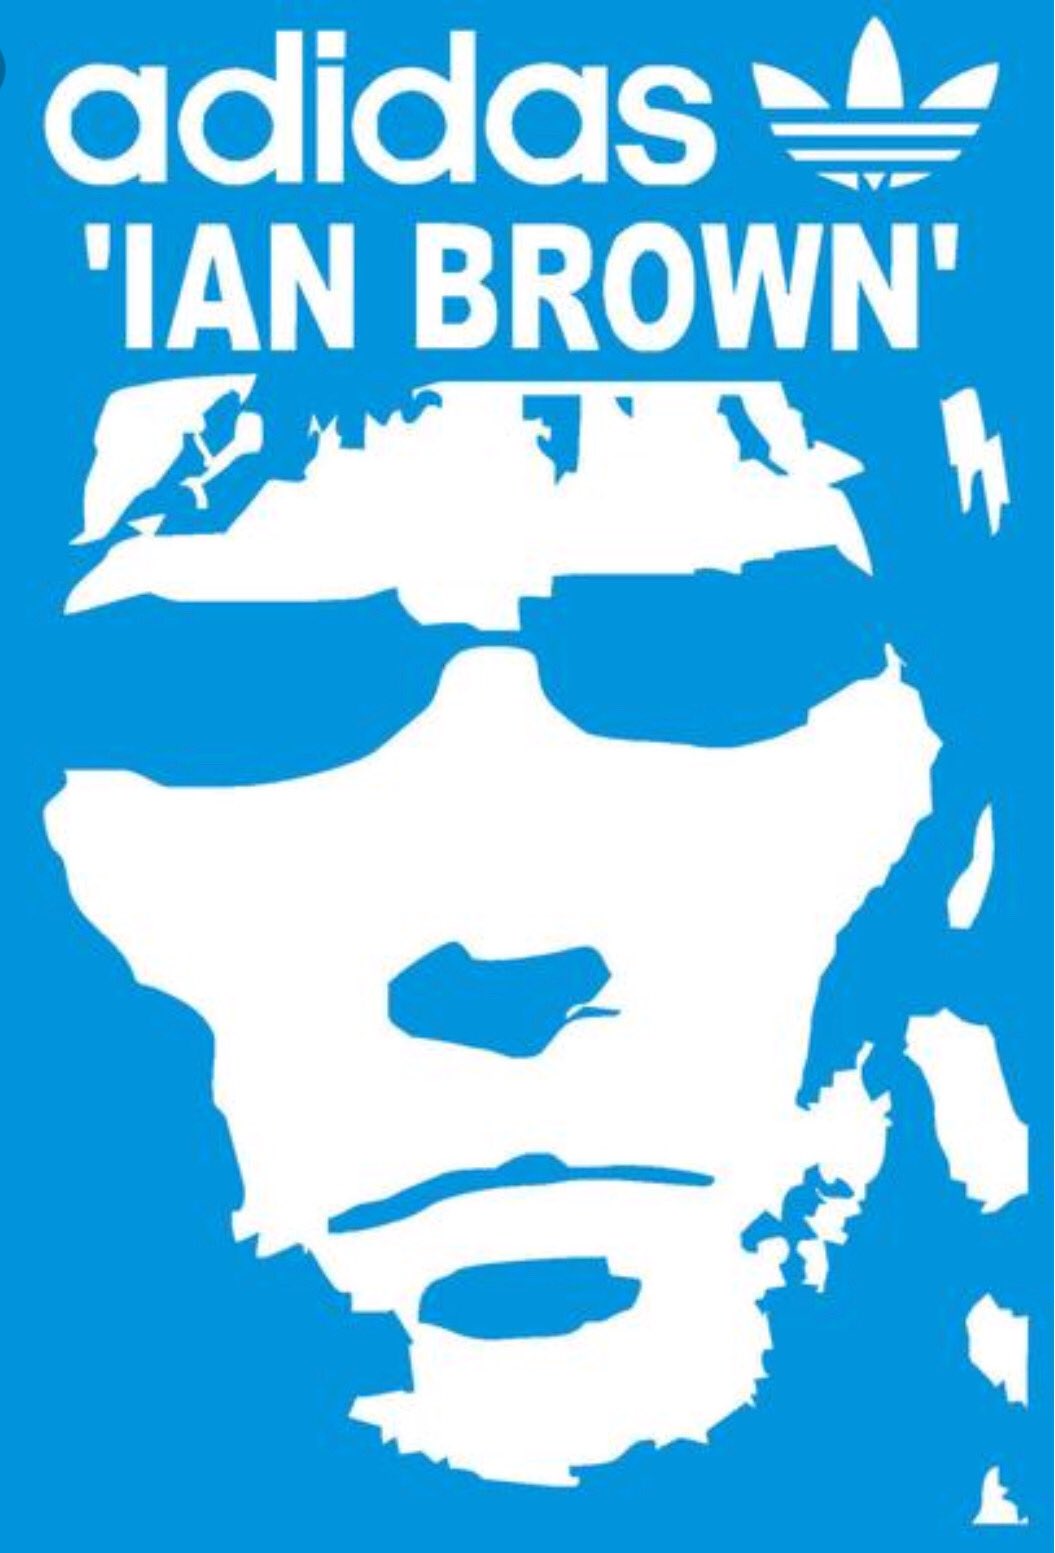 Happy bday to Ian Brown 